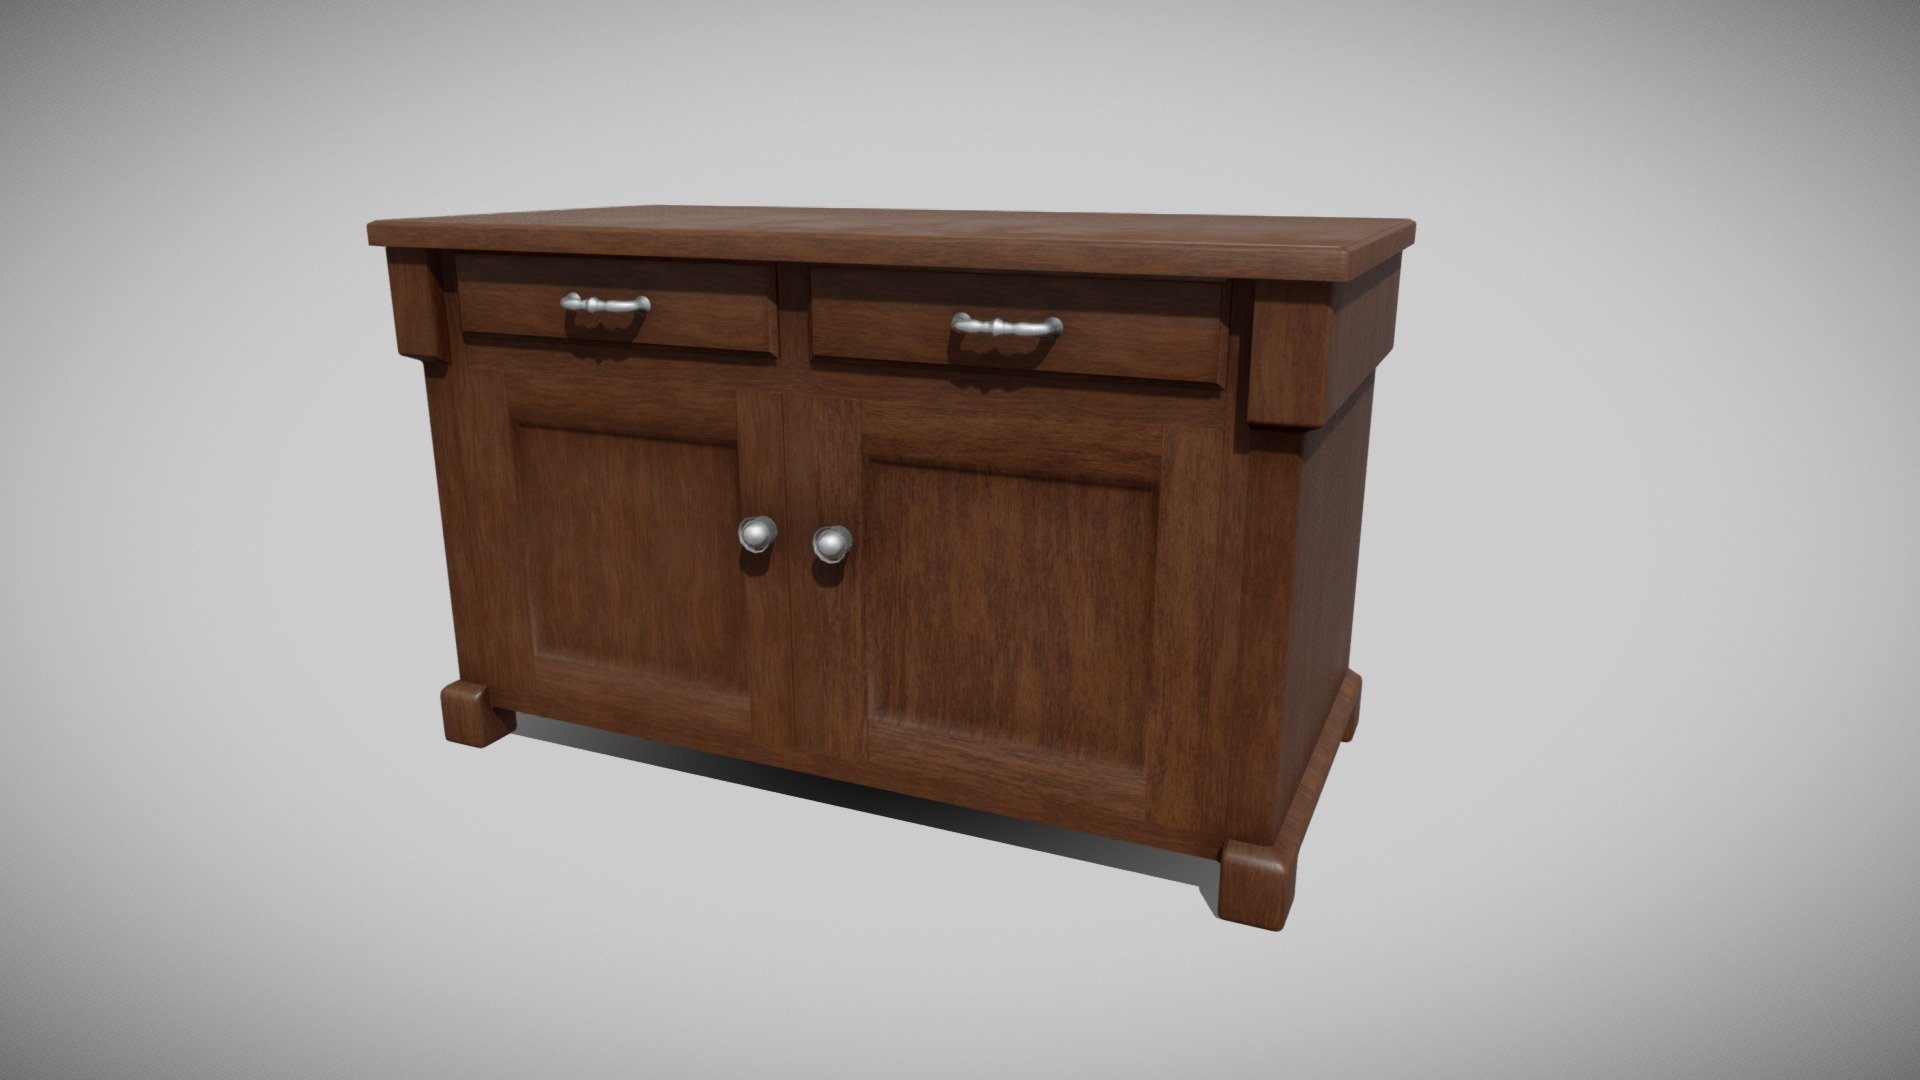 This is an old cabinet with doors and drawers (can be easily animated). There are two materials (one for the wood and the other for handles) and three 4k textures (albedo, roughness and normal map). The model is well optimized for games but still looks good enough for high quality renders 3d model